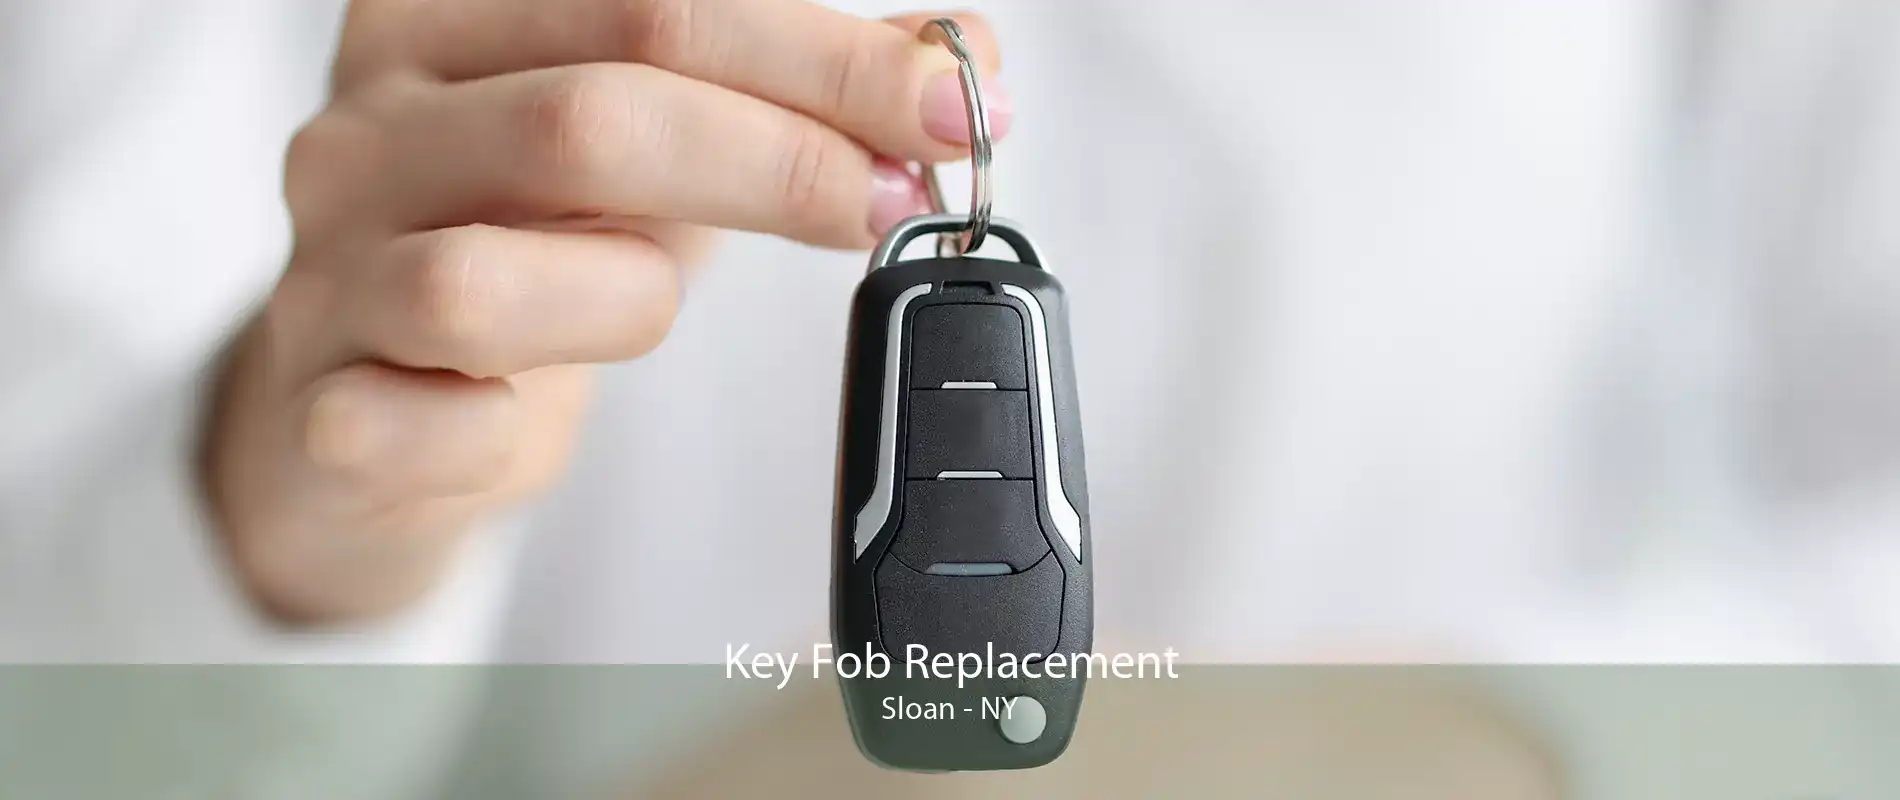 Key Fob Replacement Sloan - NY